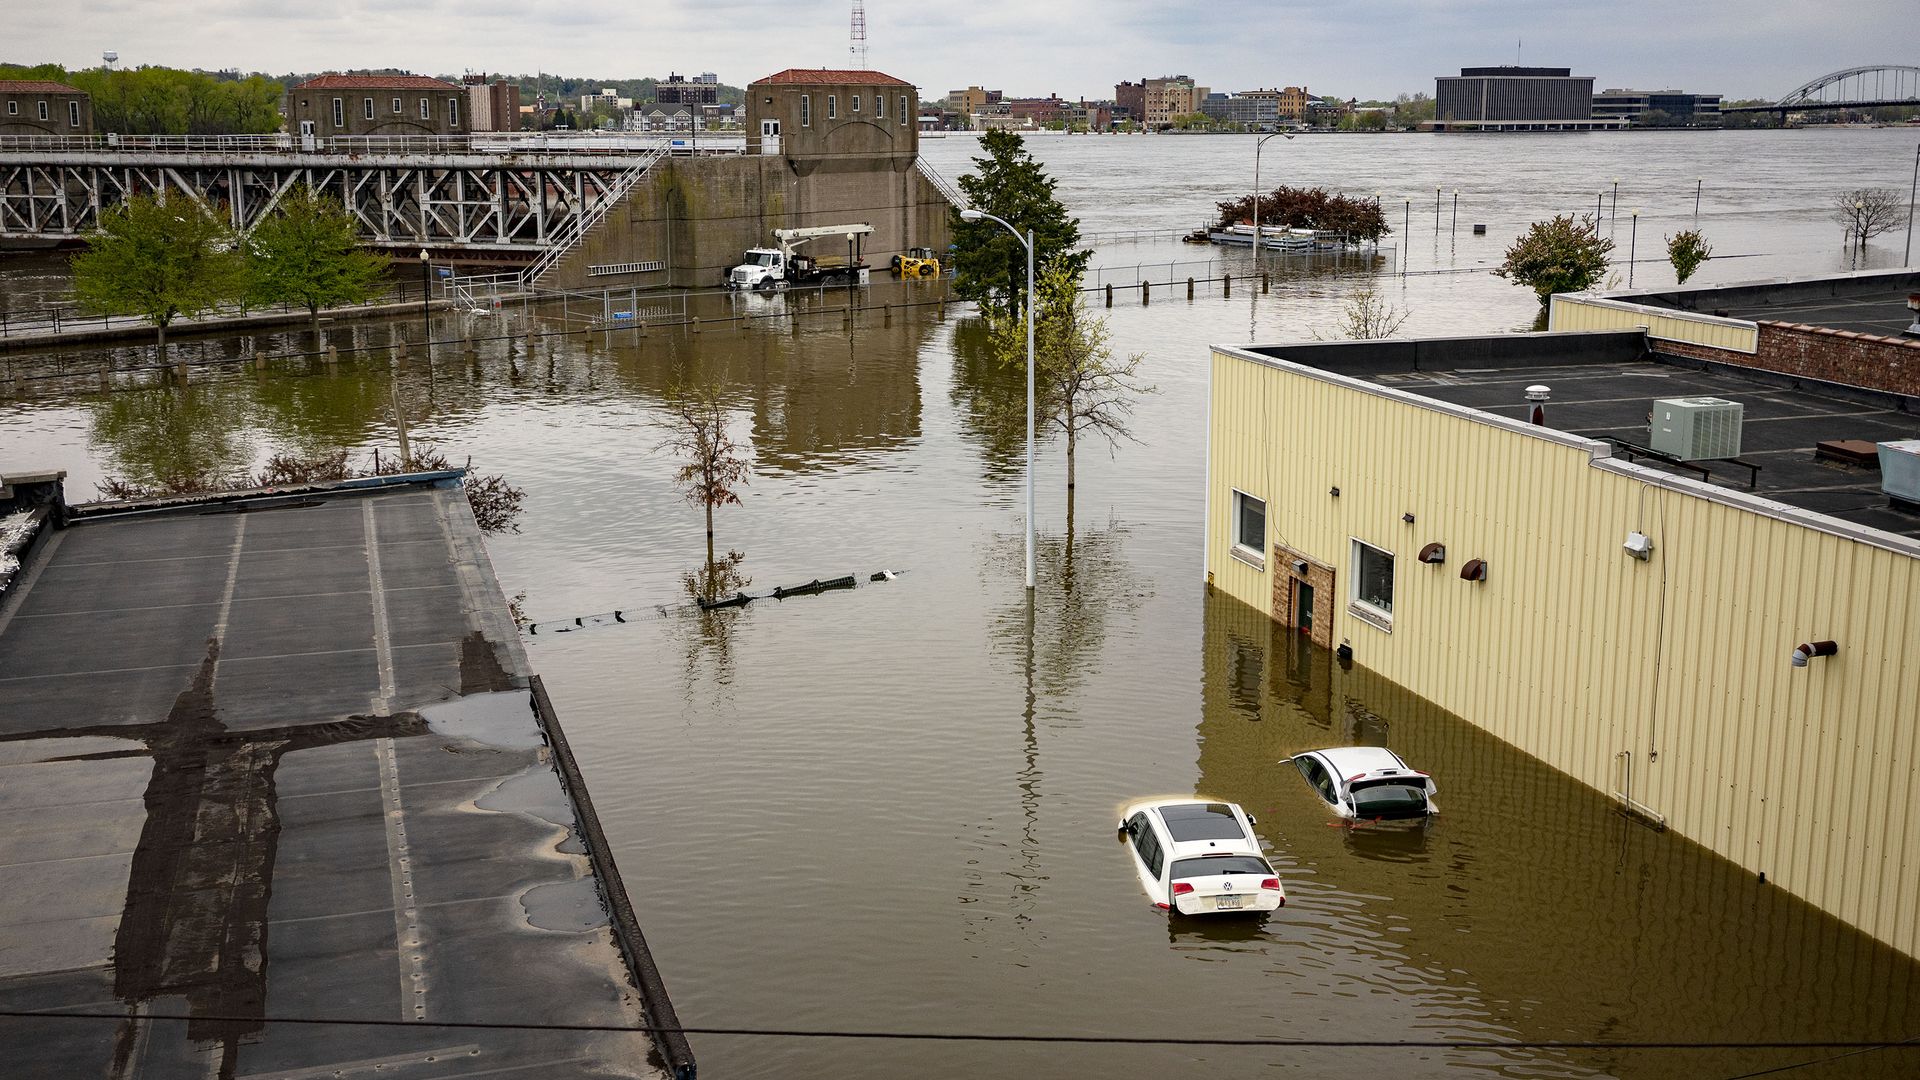 In this image, two cars float in the flood water between two buildings. This picture is a birds eye view of flood waters in a city.